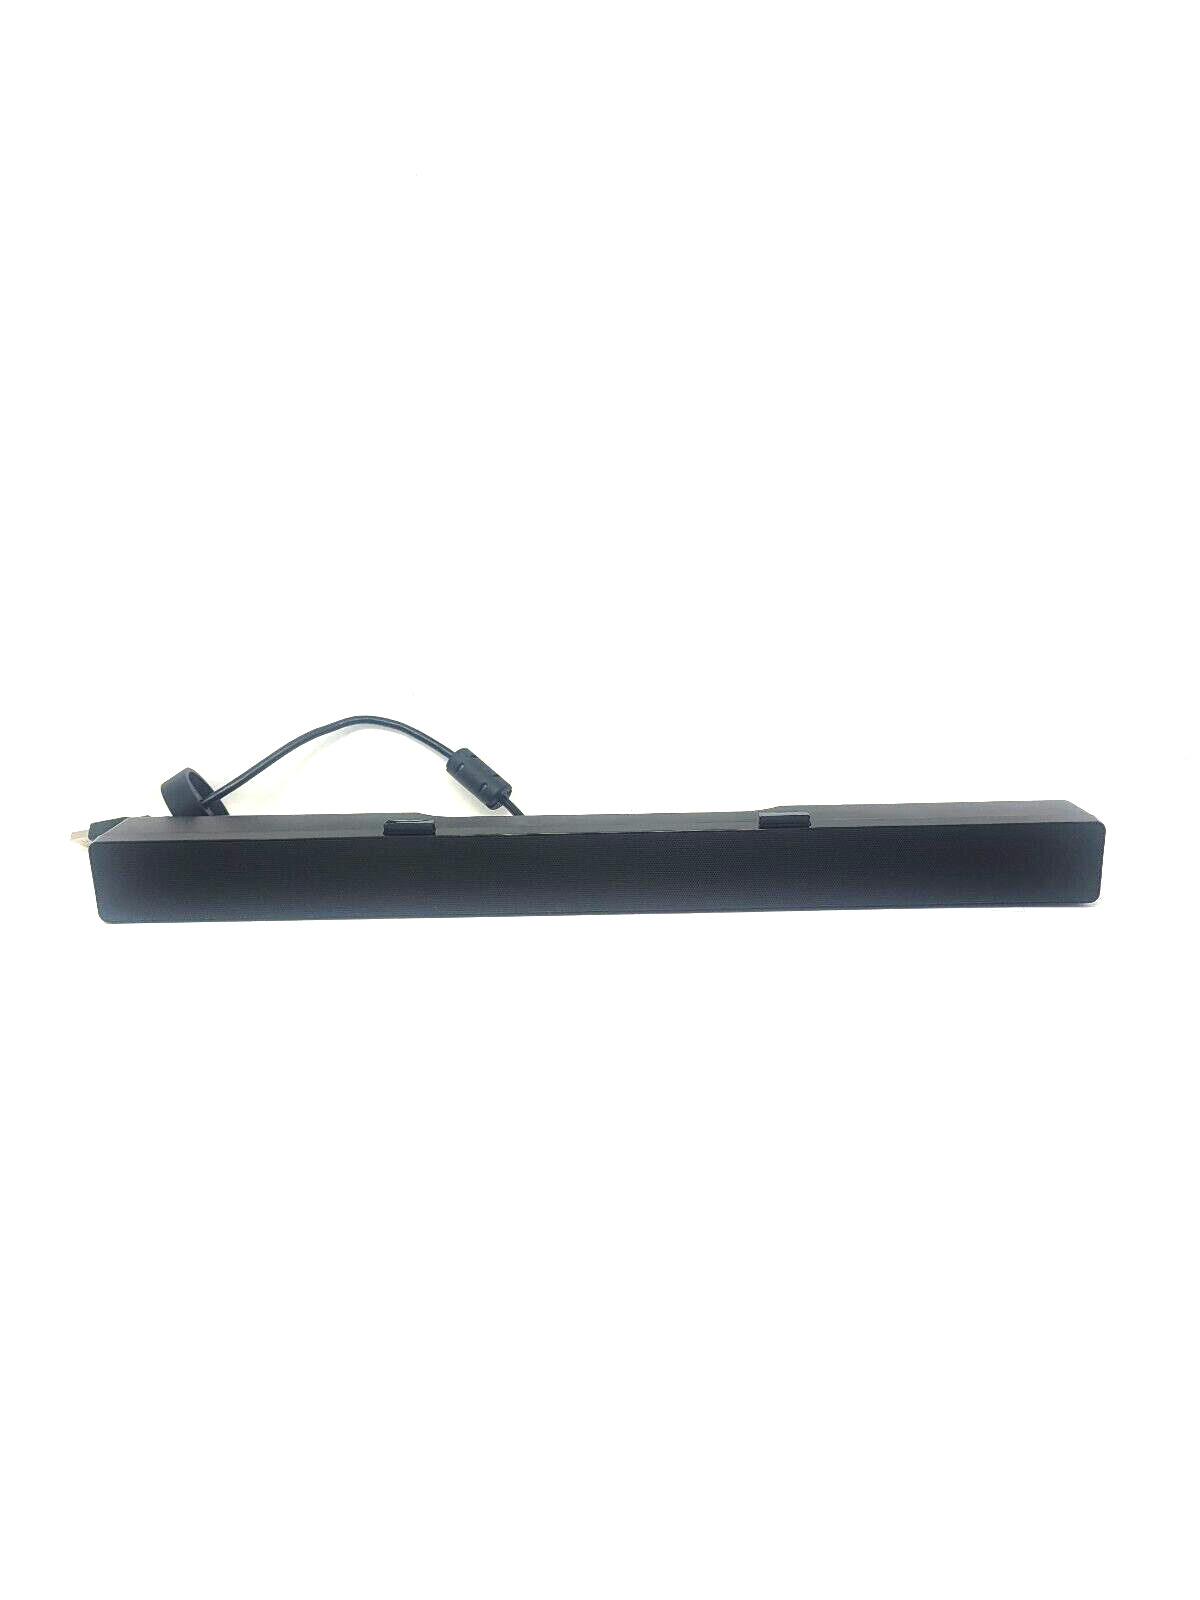 Dell AC511 Sound Bar - Black Short Cable